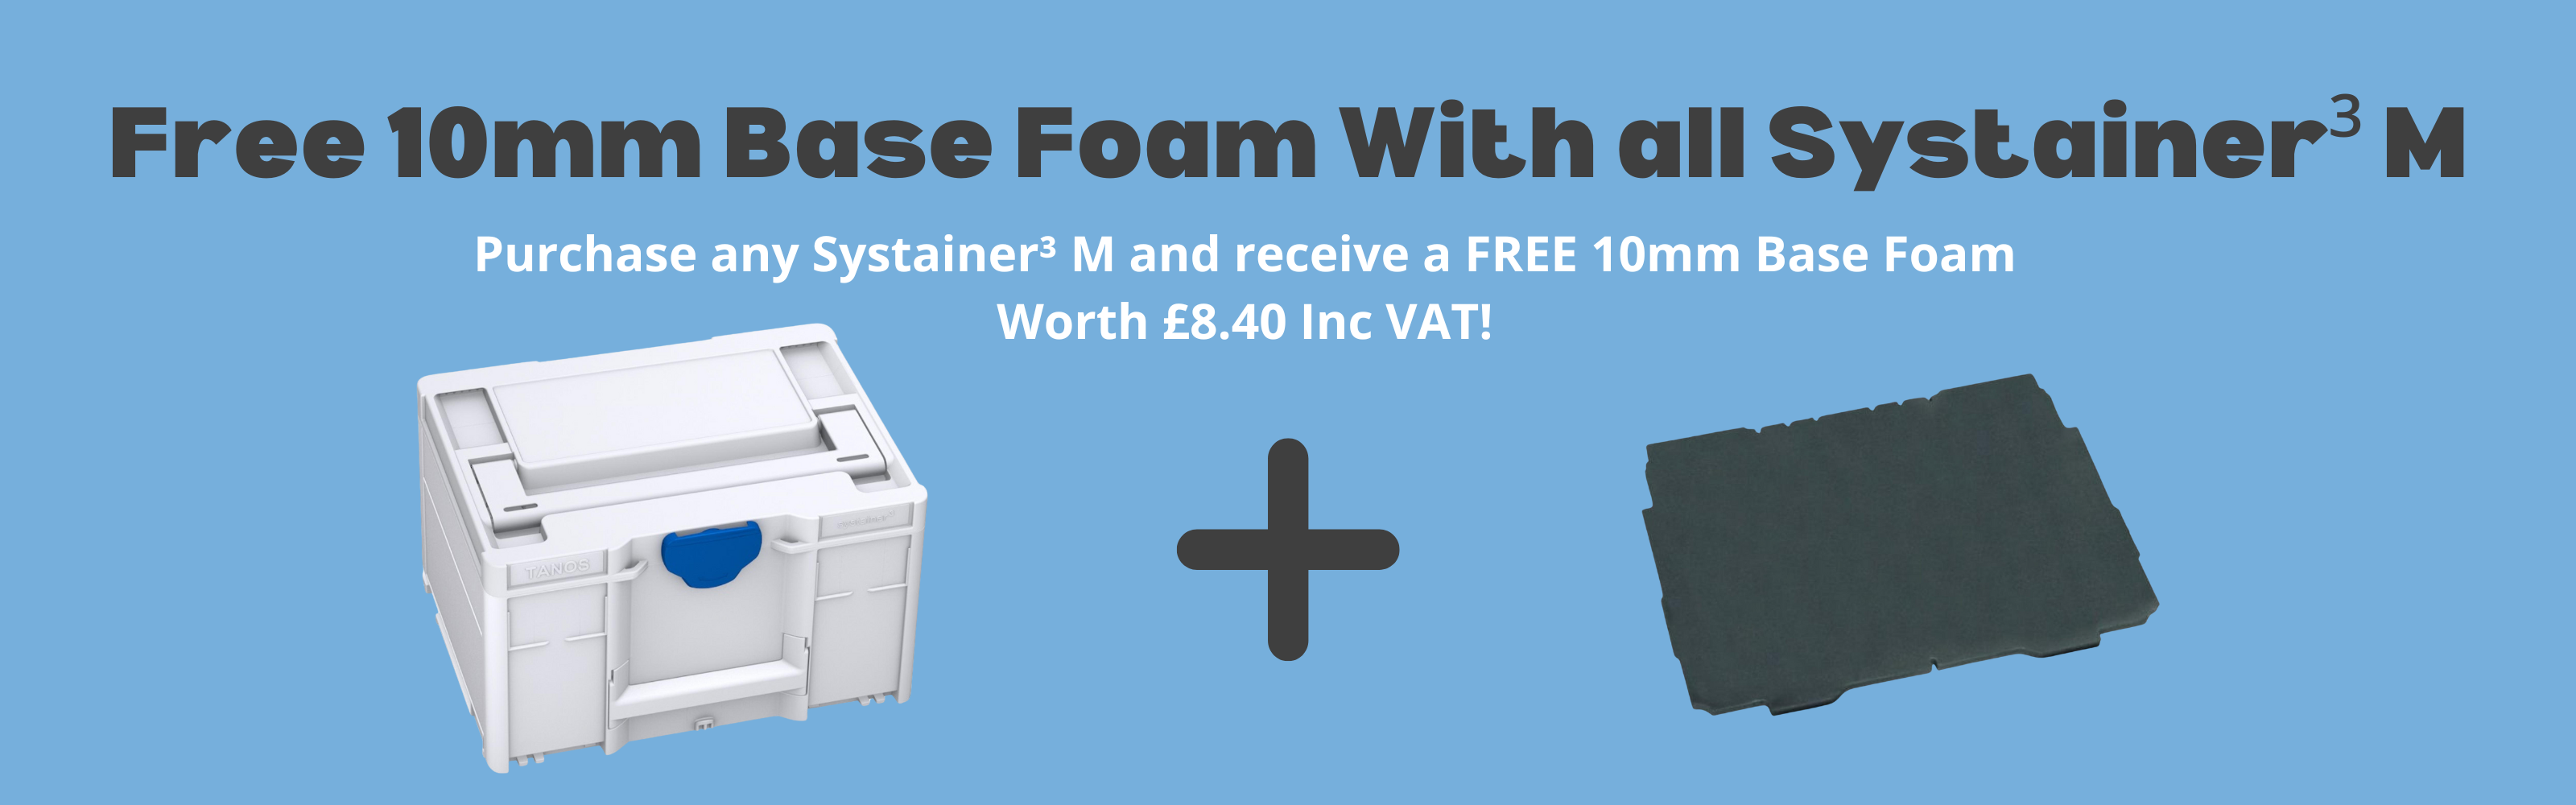 Free Base Foam For Systainer3 M .png